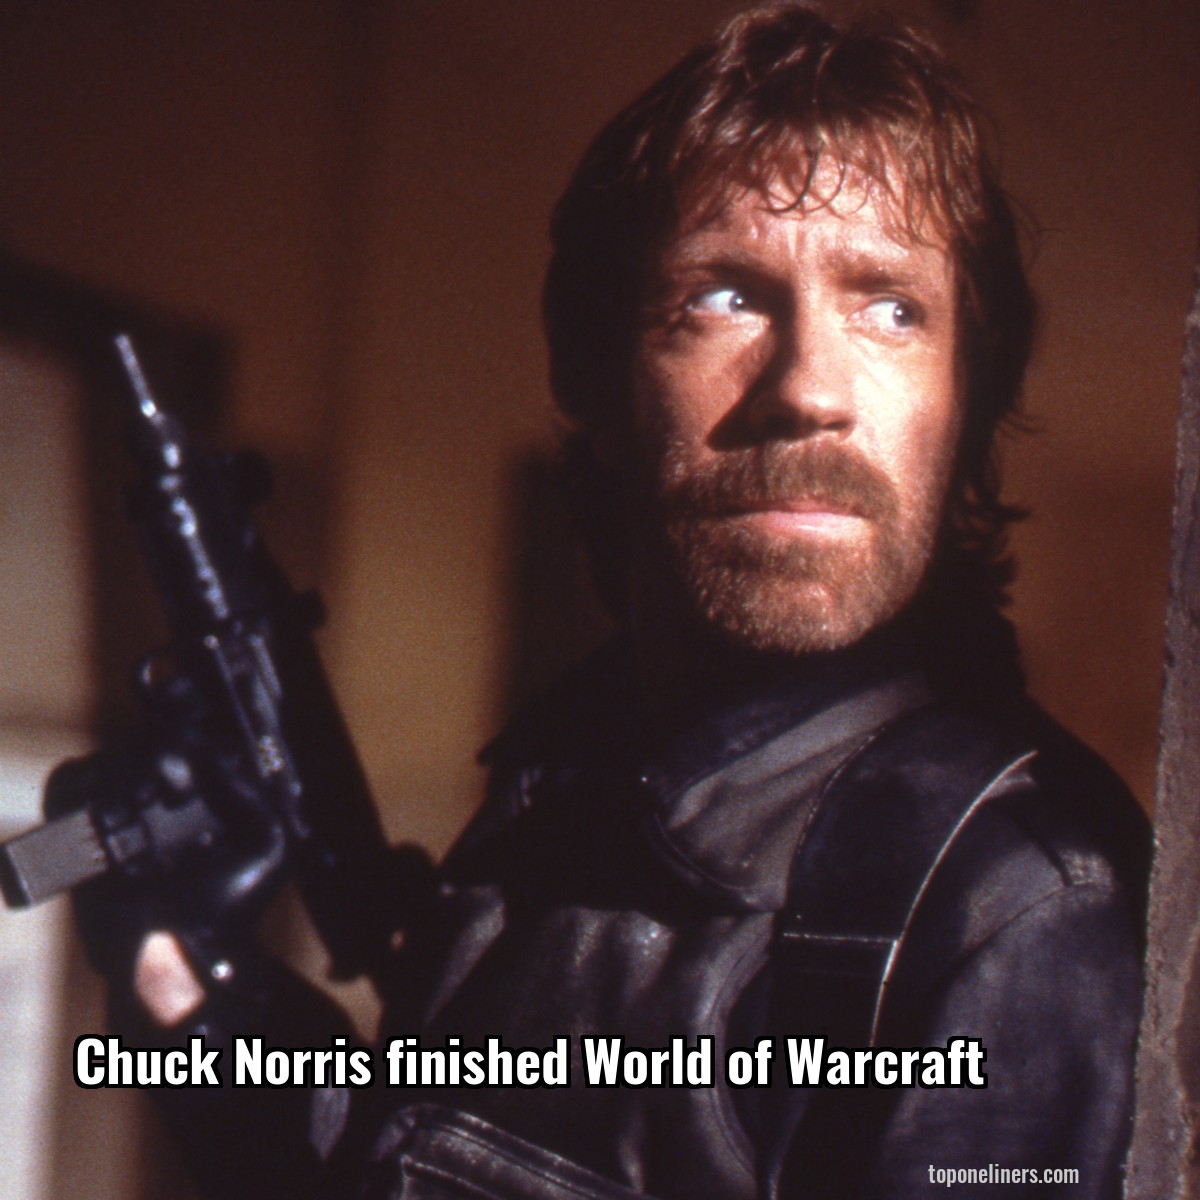 Chuck Norris finished World of Warcraft